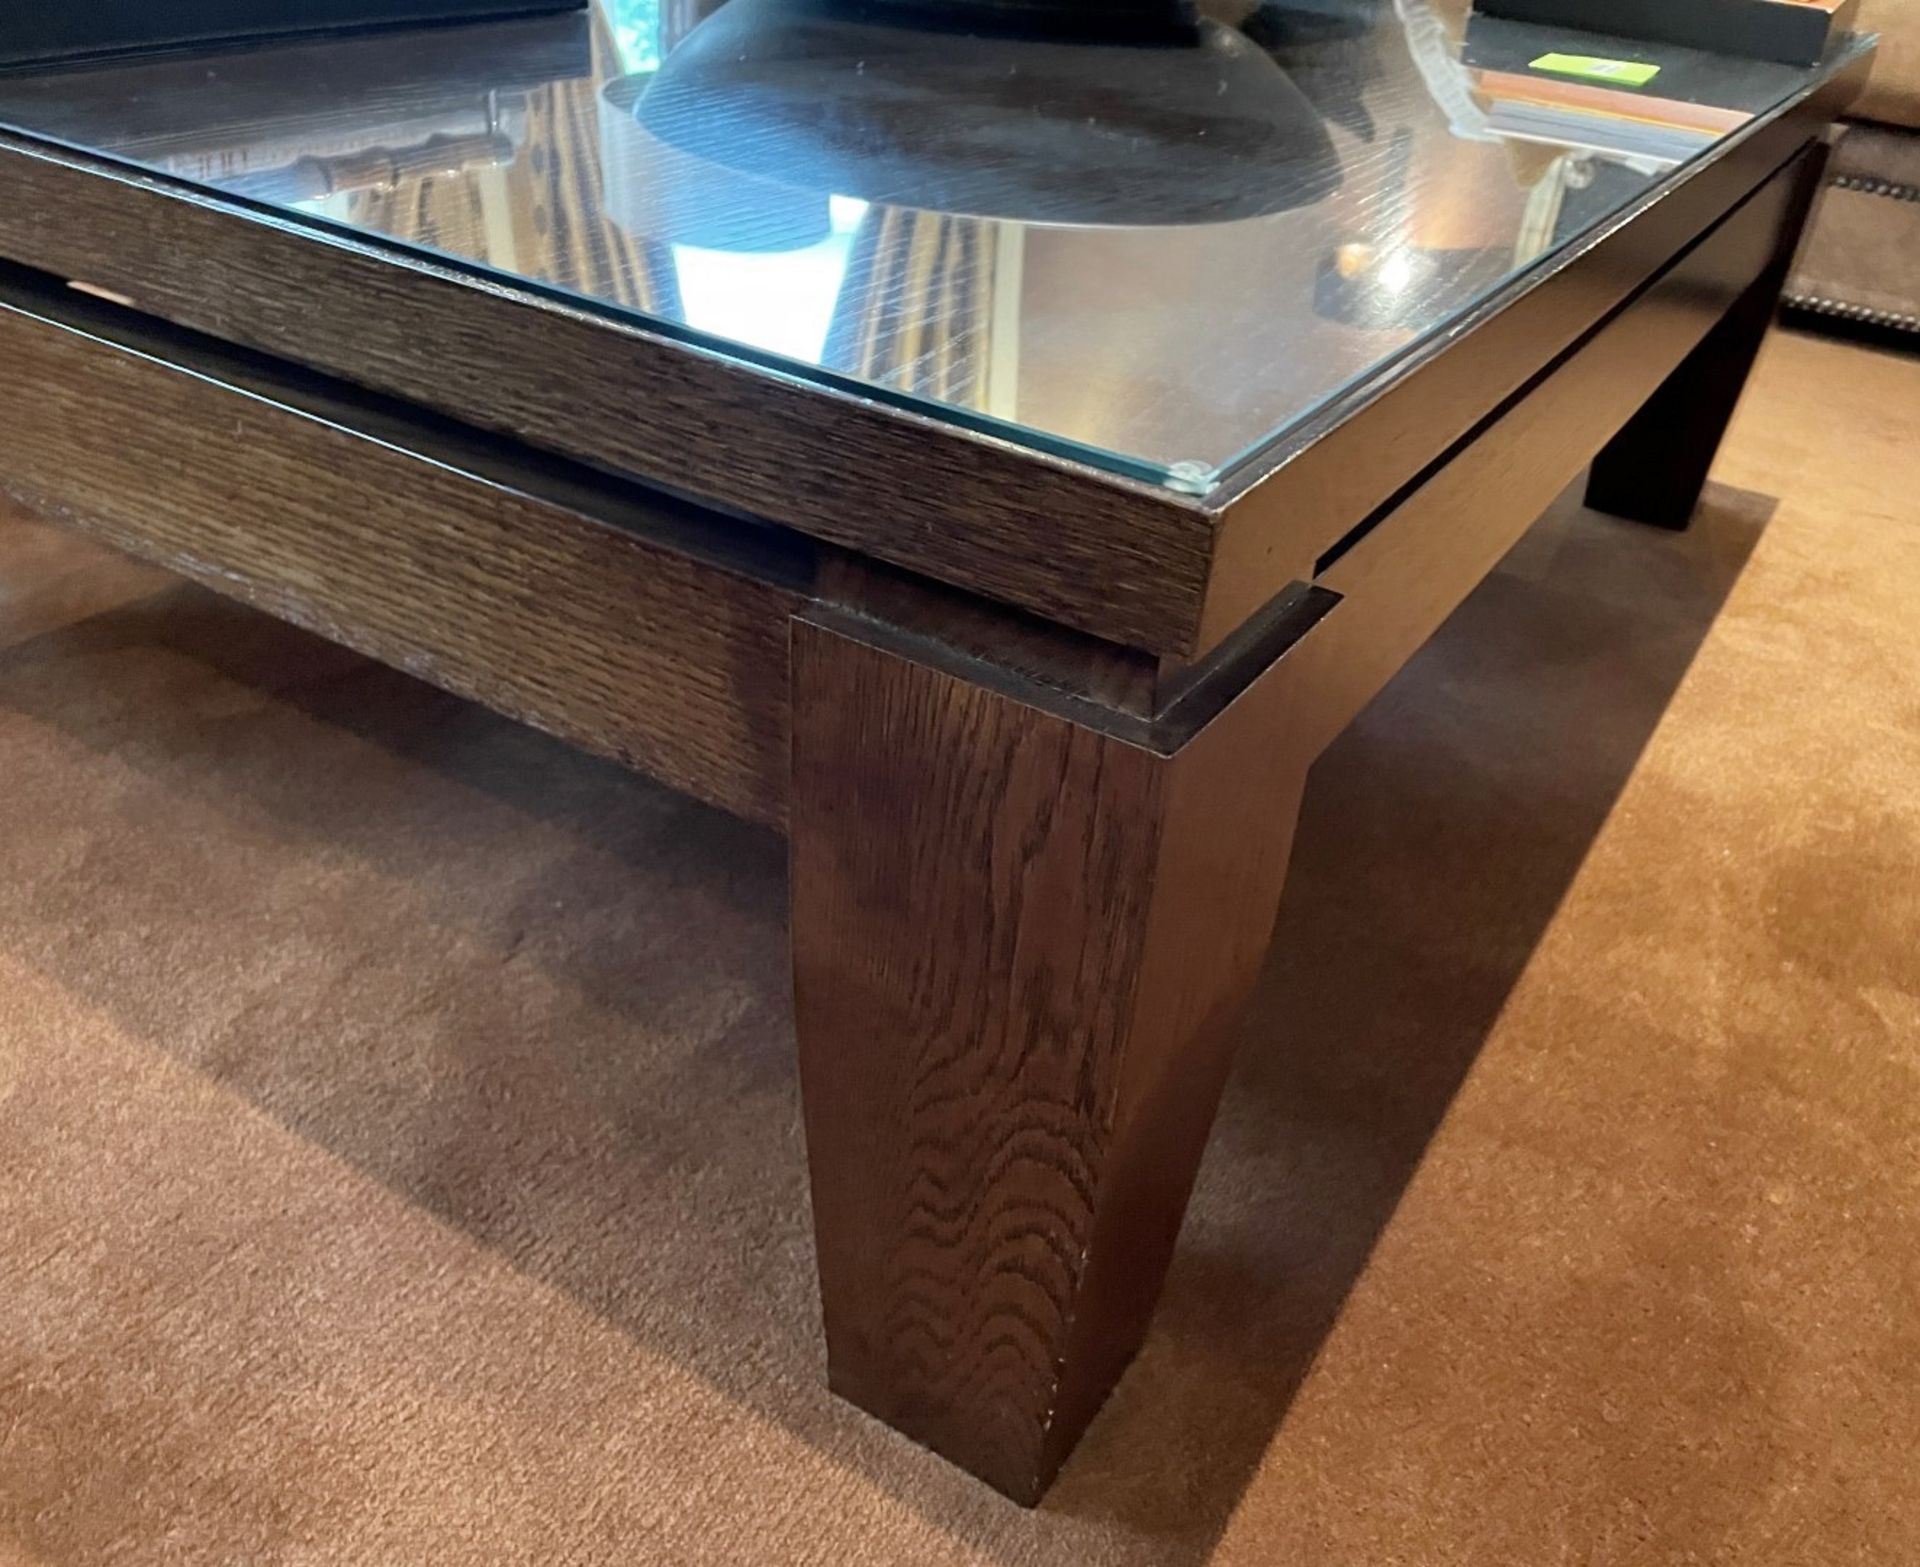 1 x Large Glass Topped Coffee Table With a Solid Wood Table - Dimensions: 150 x 120 x 48cm - Image 4 of 8